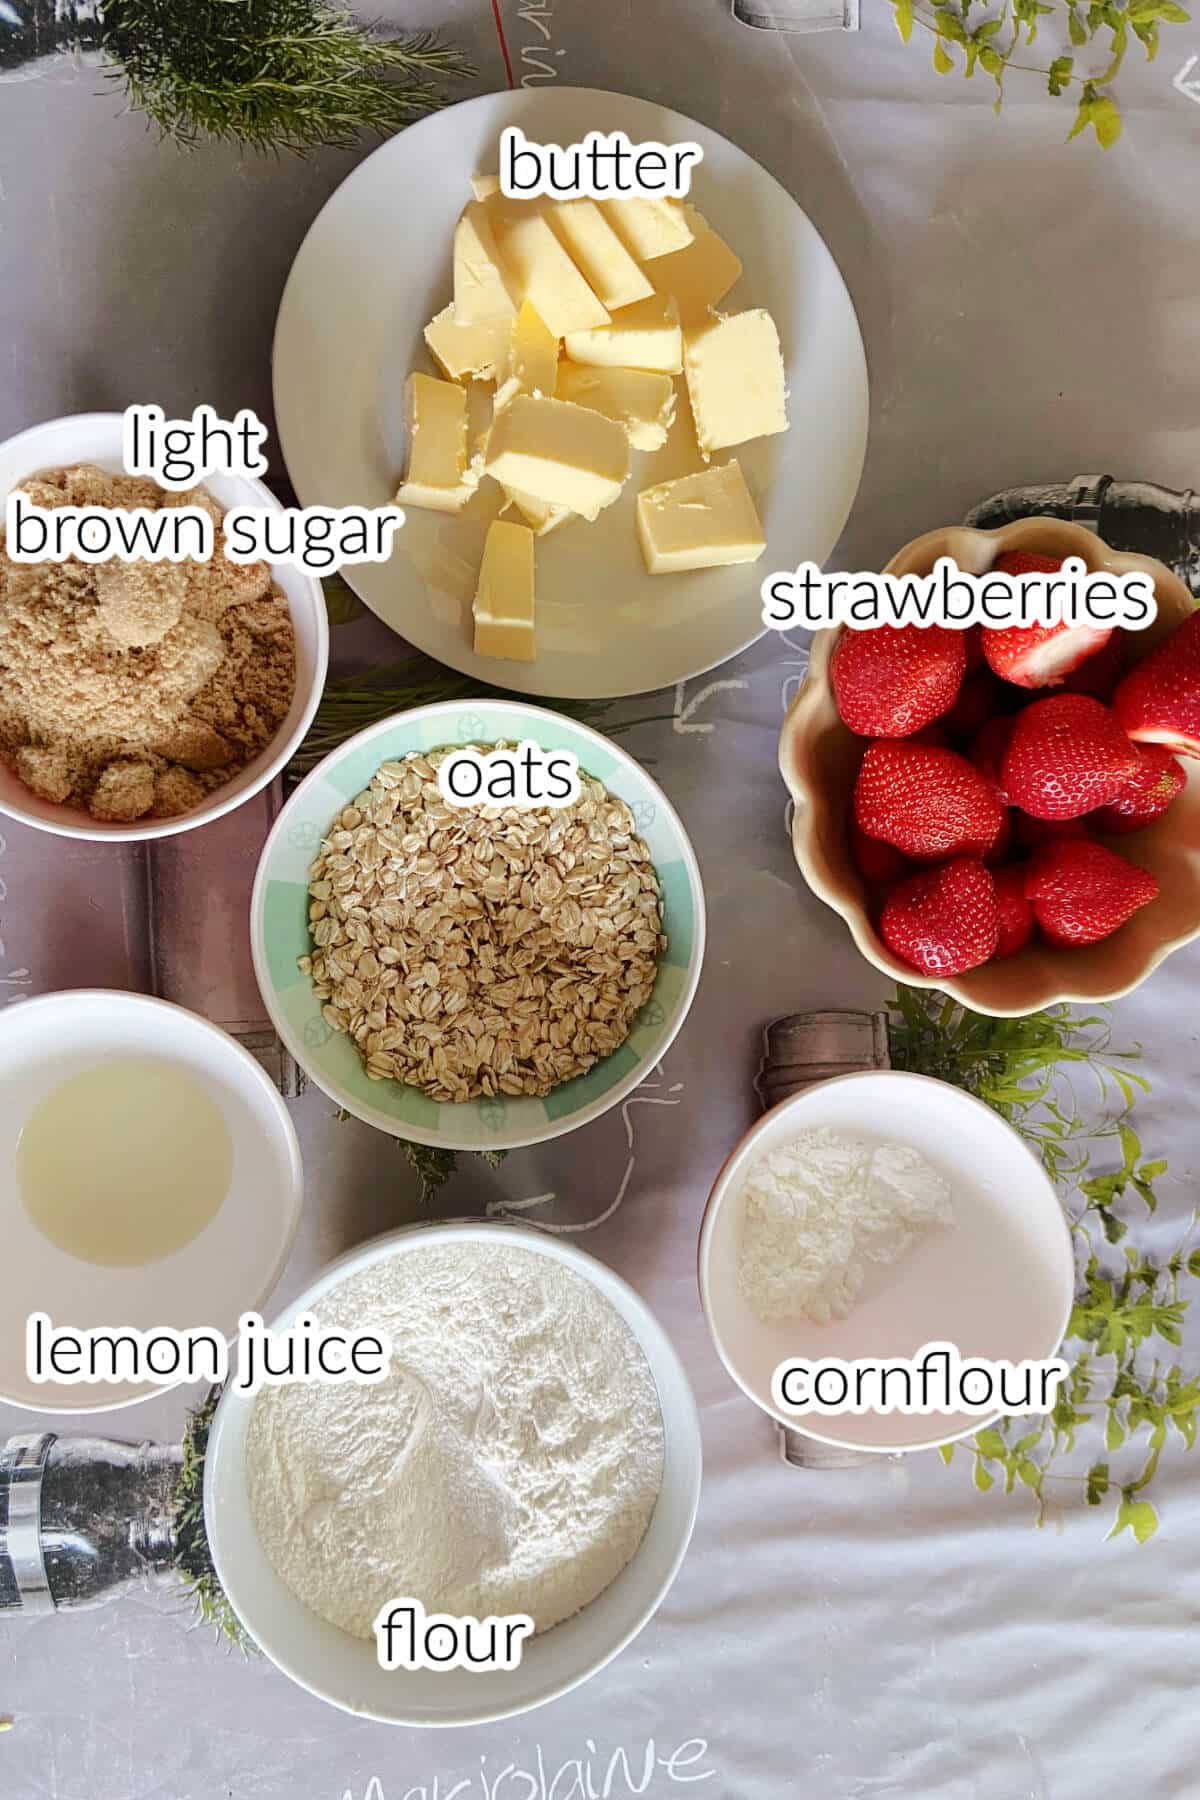 Ingredients used to make strawberry crumble bars.